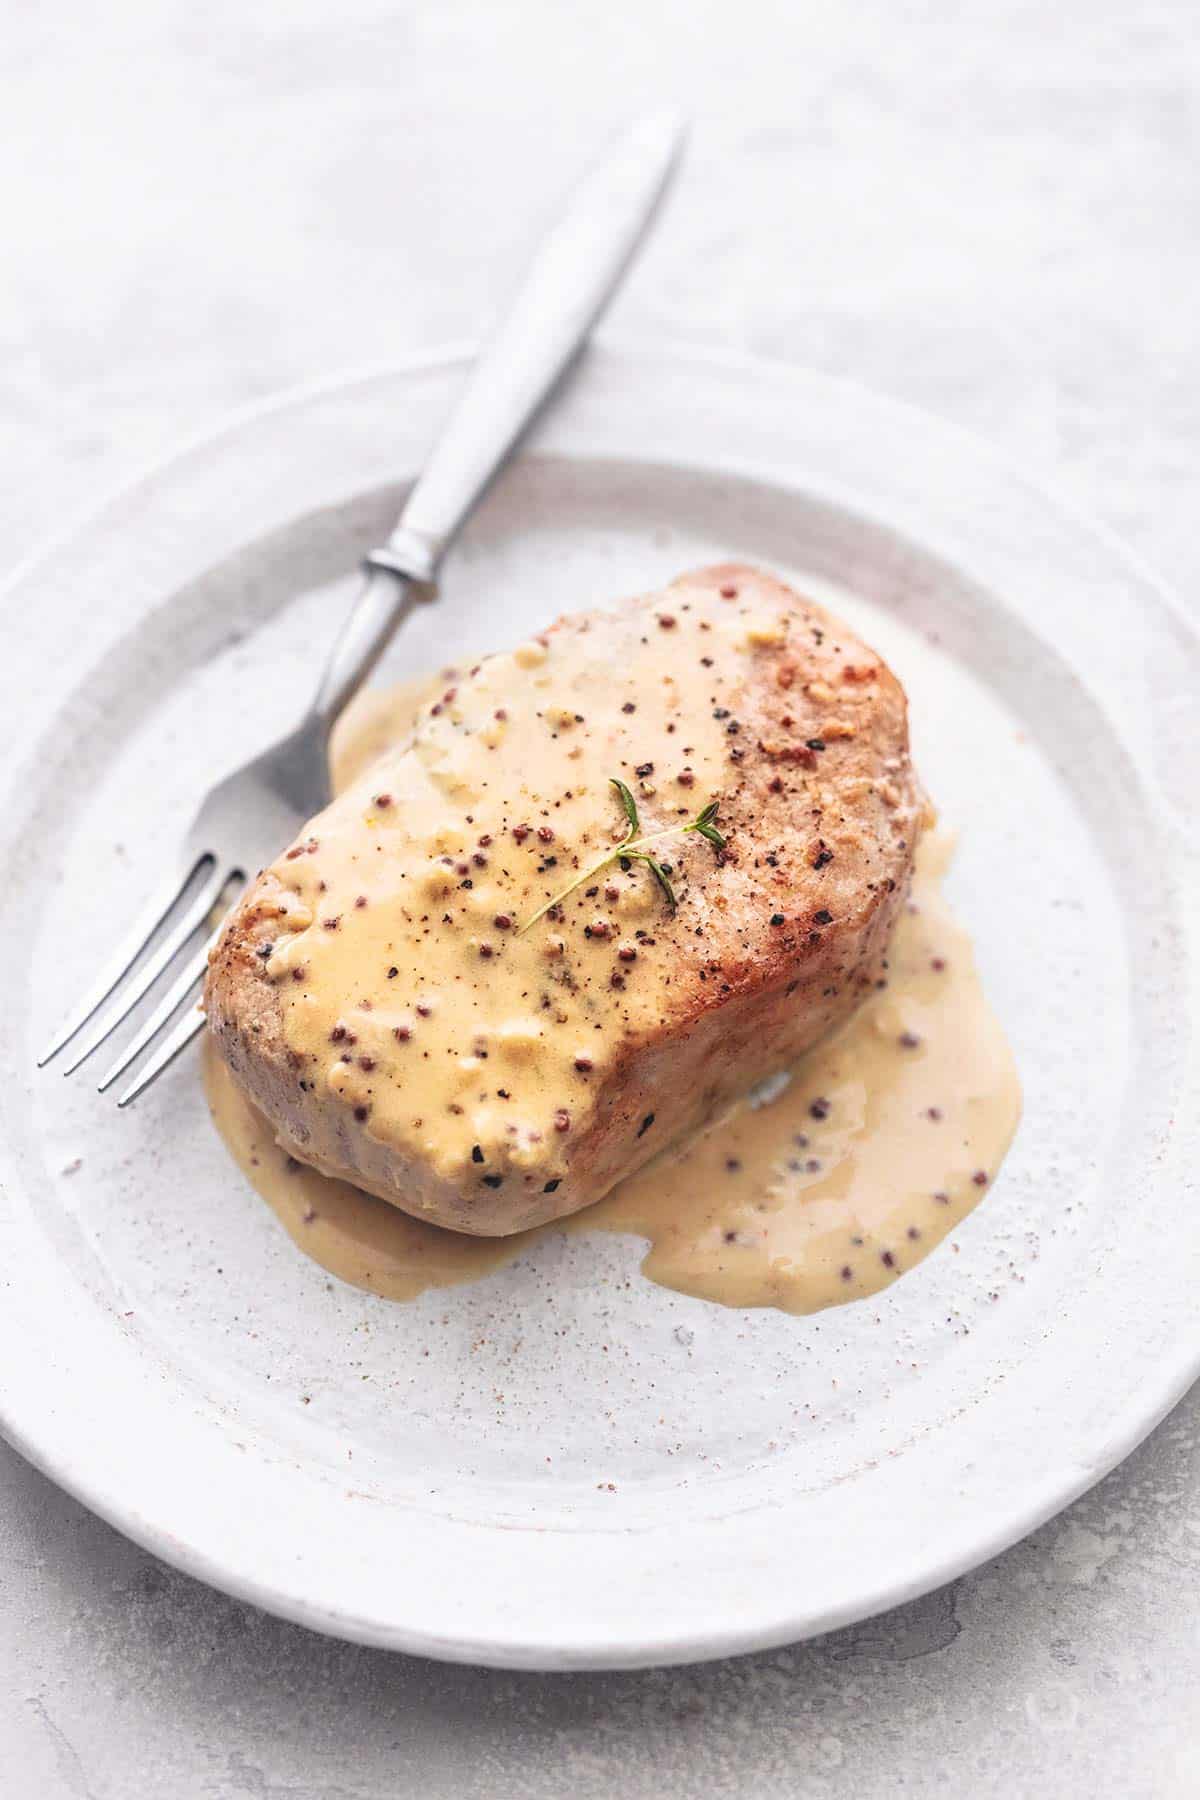 pork chops with cream sauce on a plate